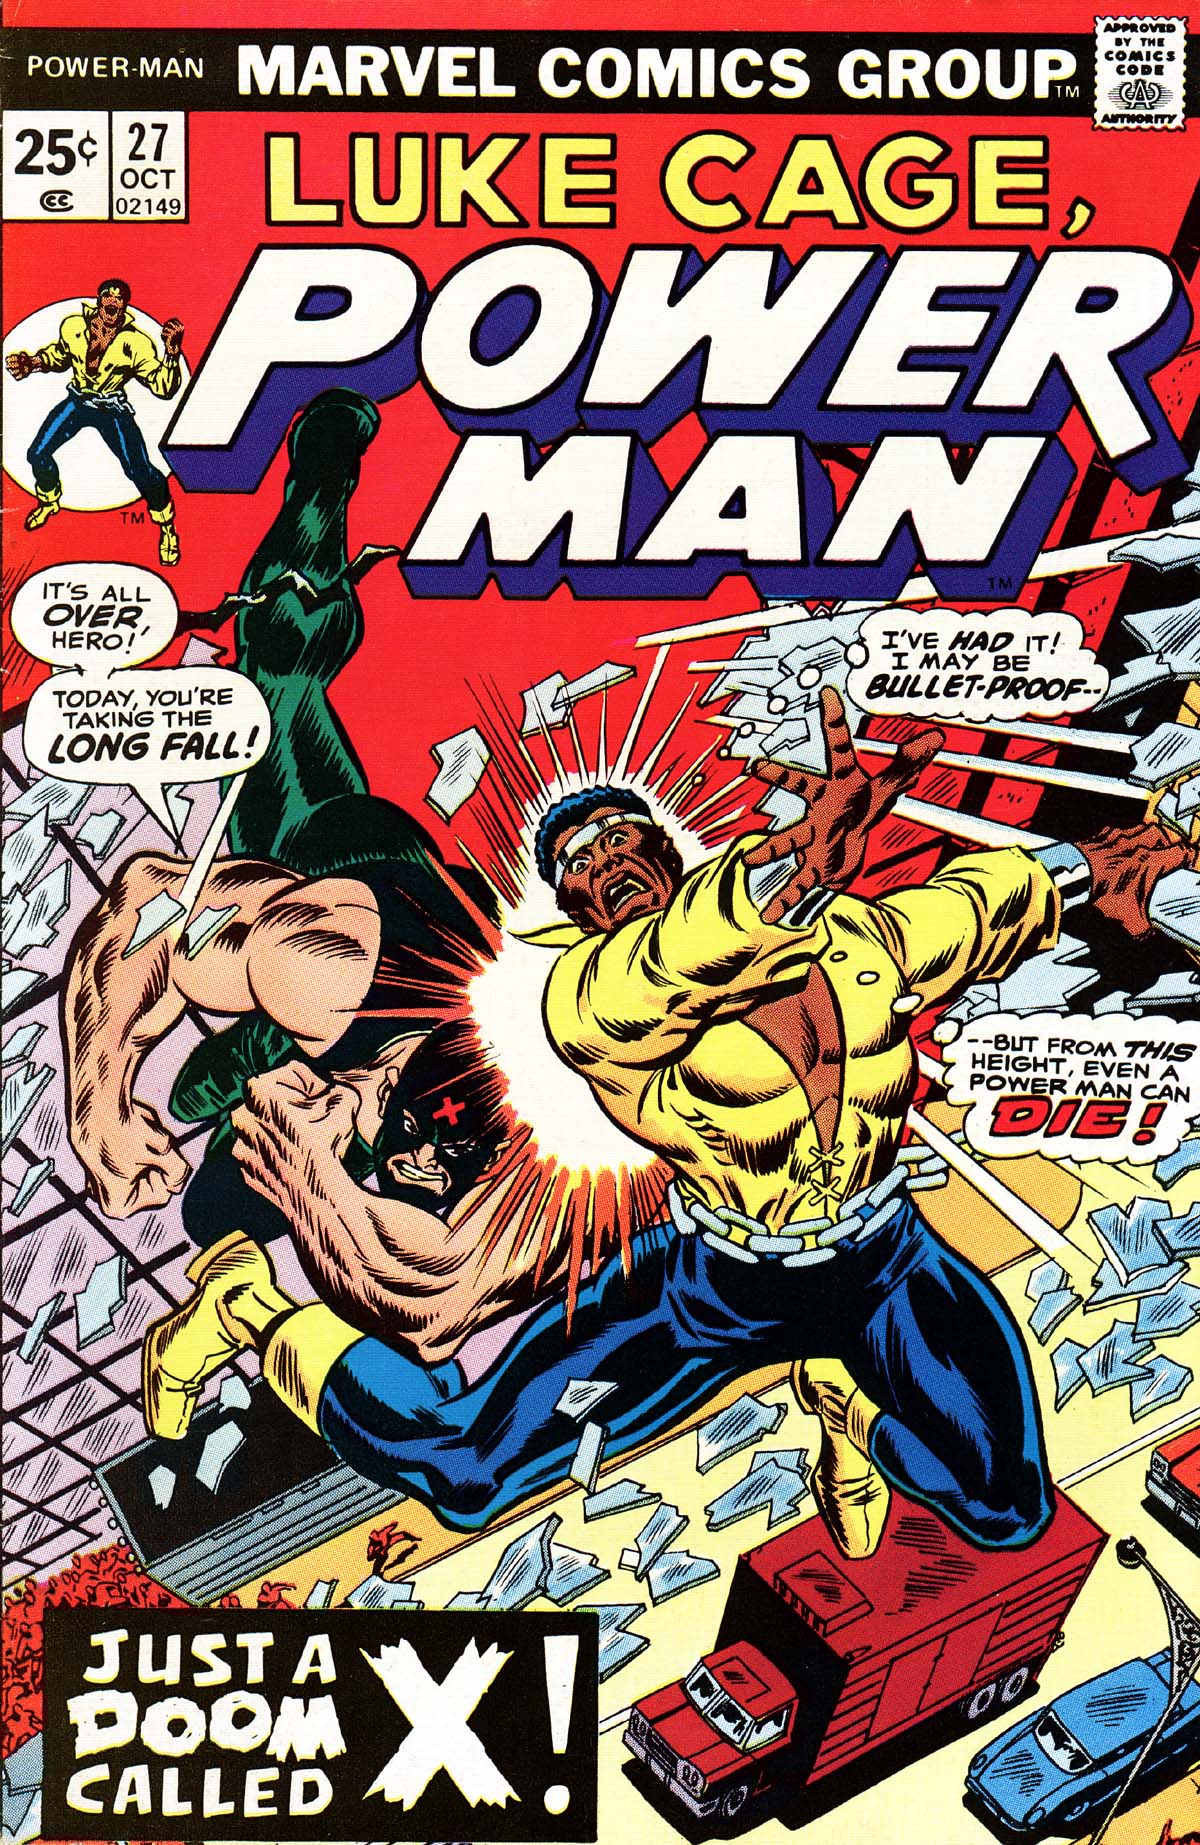 Read online Power Man comic -  Issue #27 - 1